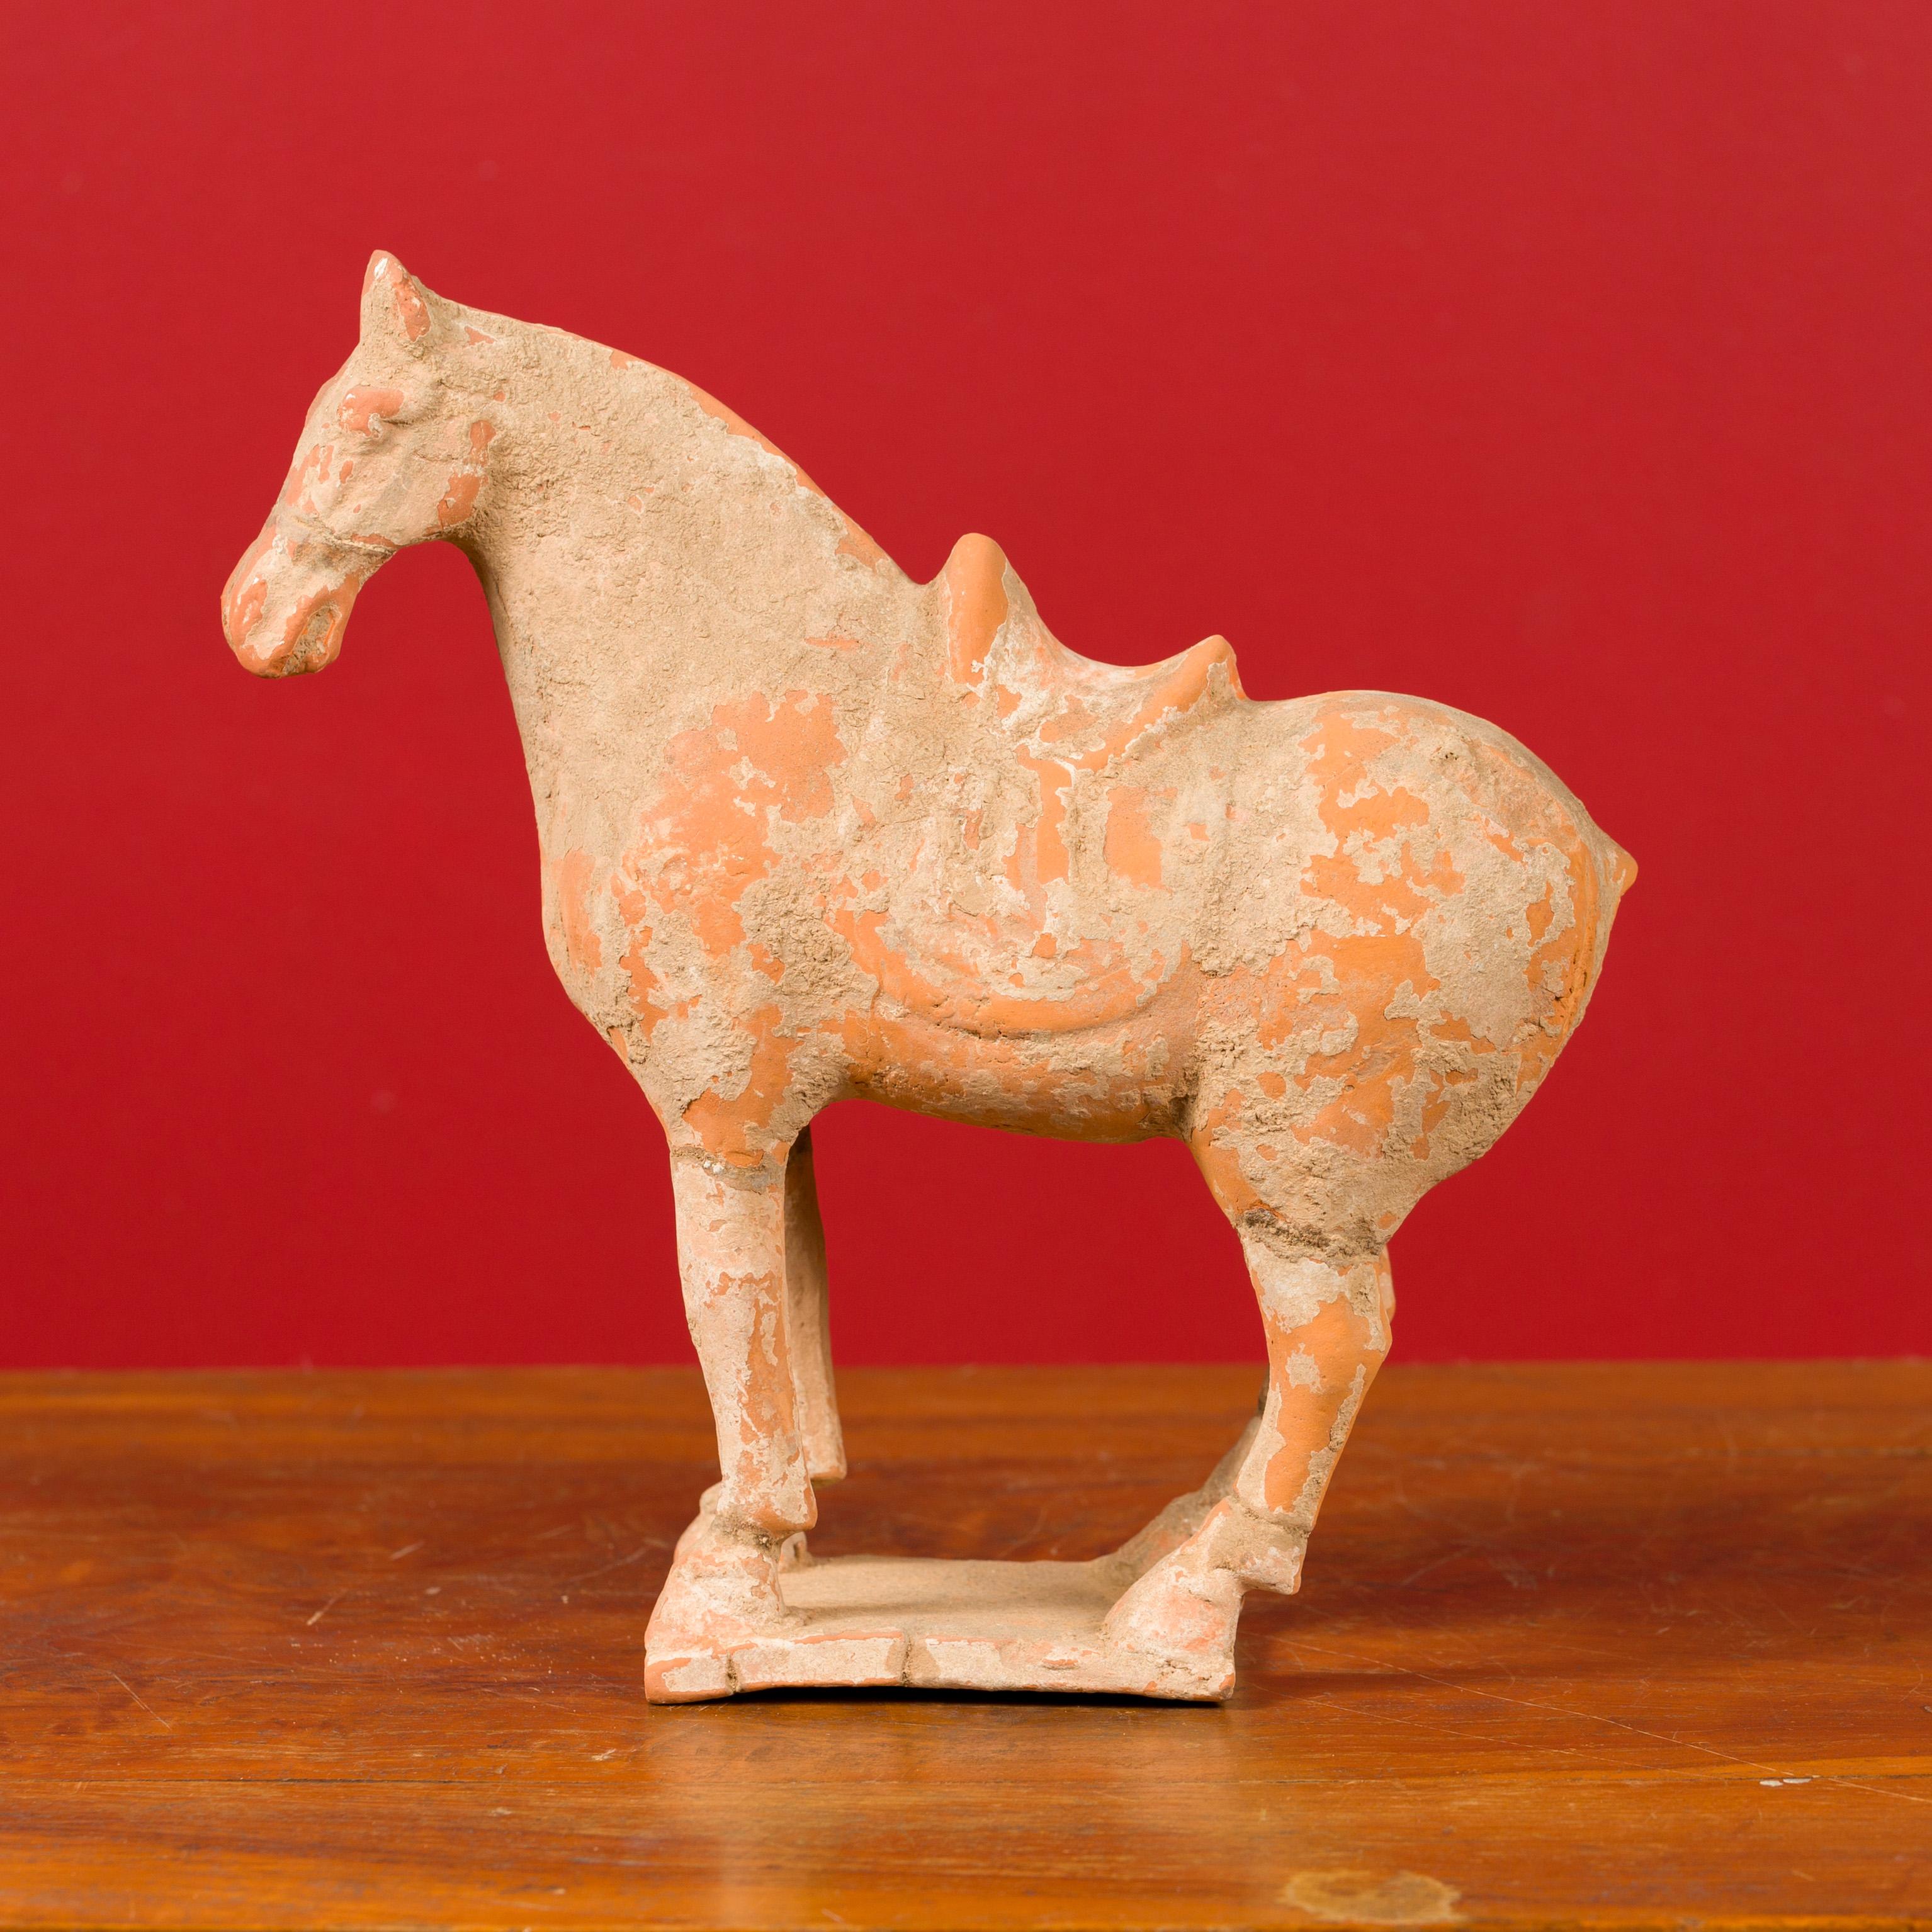 A Chinese Han dynasty period mingqi terracotta horse with traces of original paint, circa 202 BC-200 AD. This mingqi, a funerary statue created to be buried with the deceased to secure an enjoyable afterlife, features a horse proudly standing on its